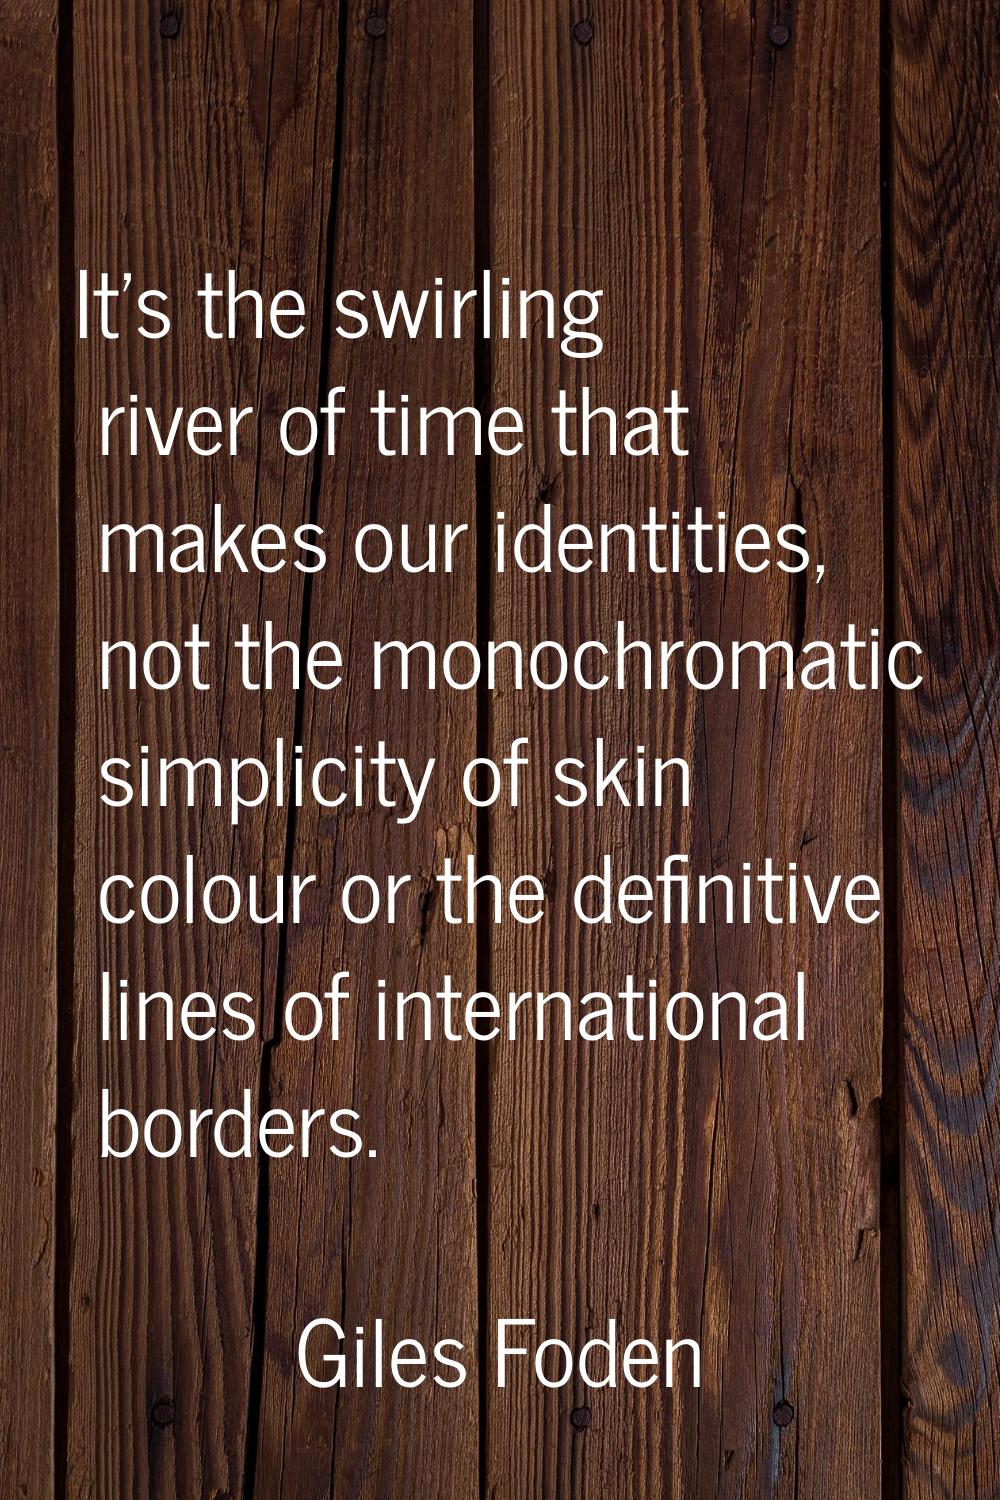 It's the swirling river of time that makes our identities, not the monochromatic simplicity of skin